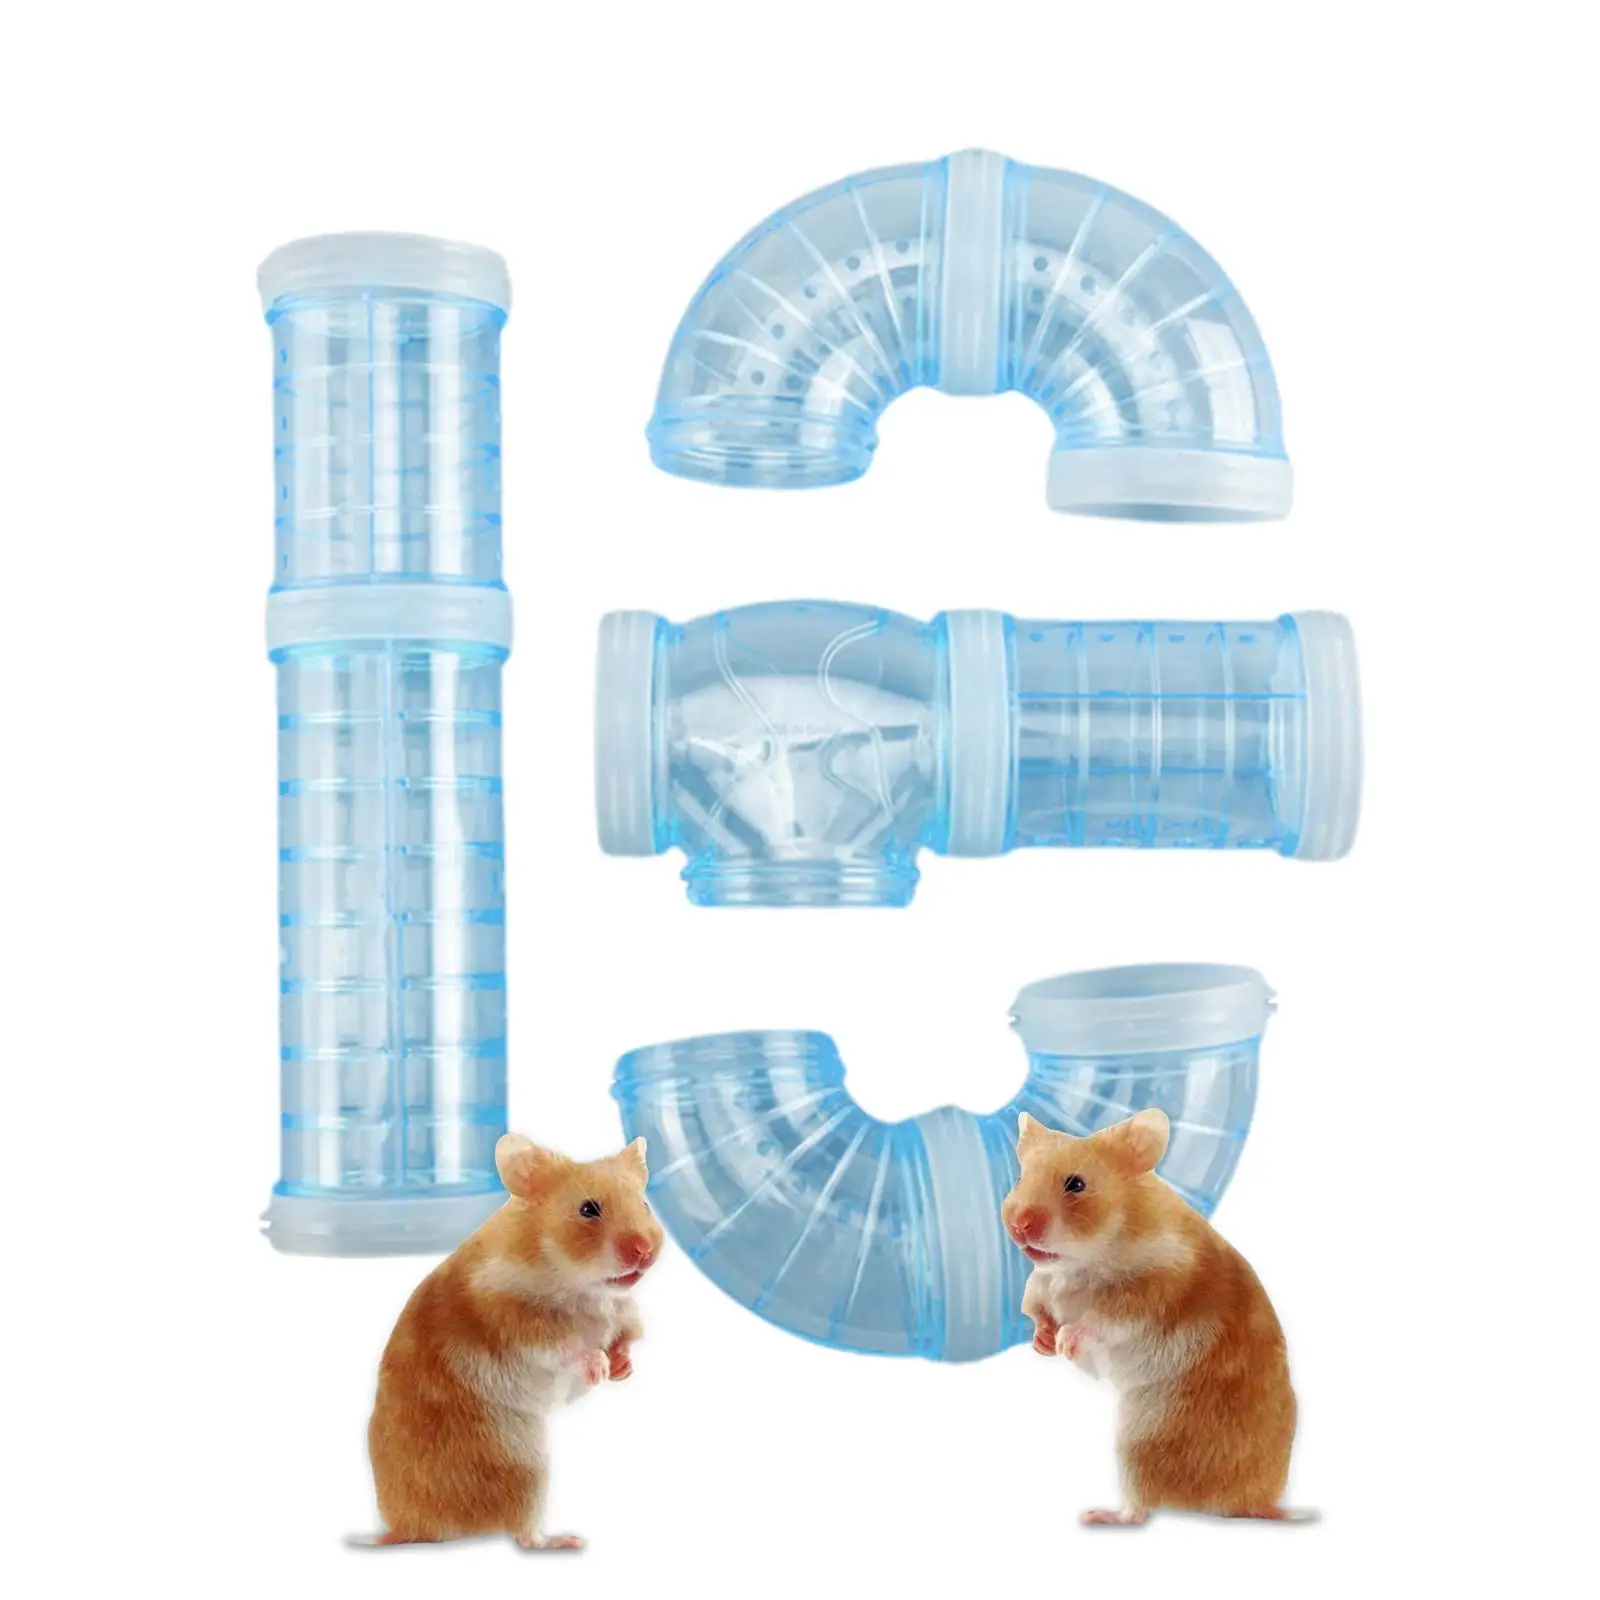 Hamster Tube Set 8Pcs Curved Pipe DIY Hamster Exercise Toys for Mouse Small Animals Rat Small Pet Toy Habitat Cage Accessories